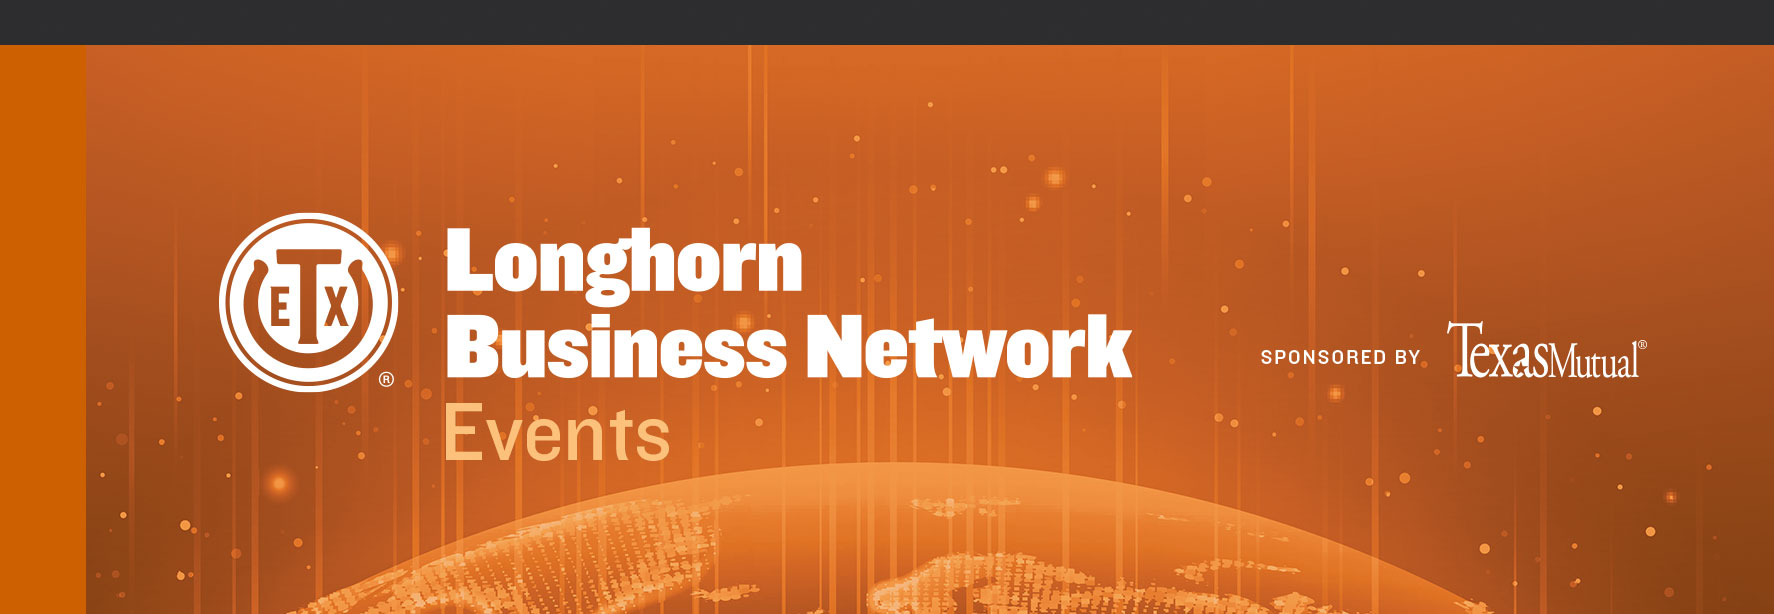 Longhorn Business Network Events